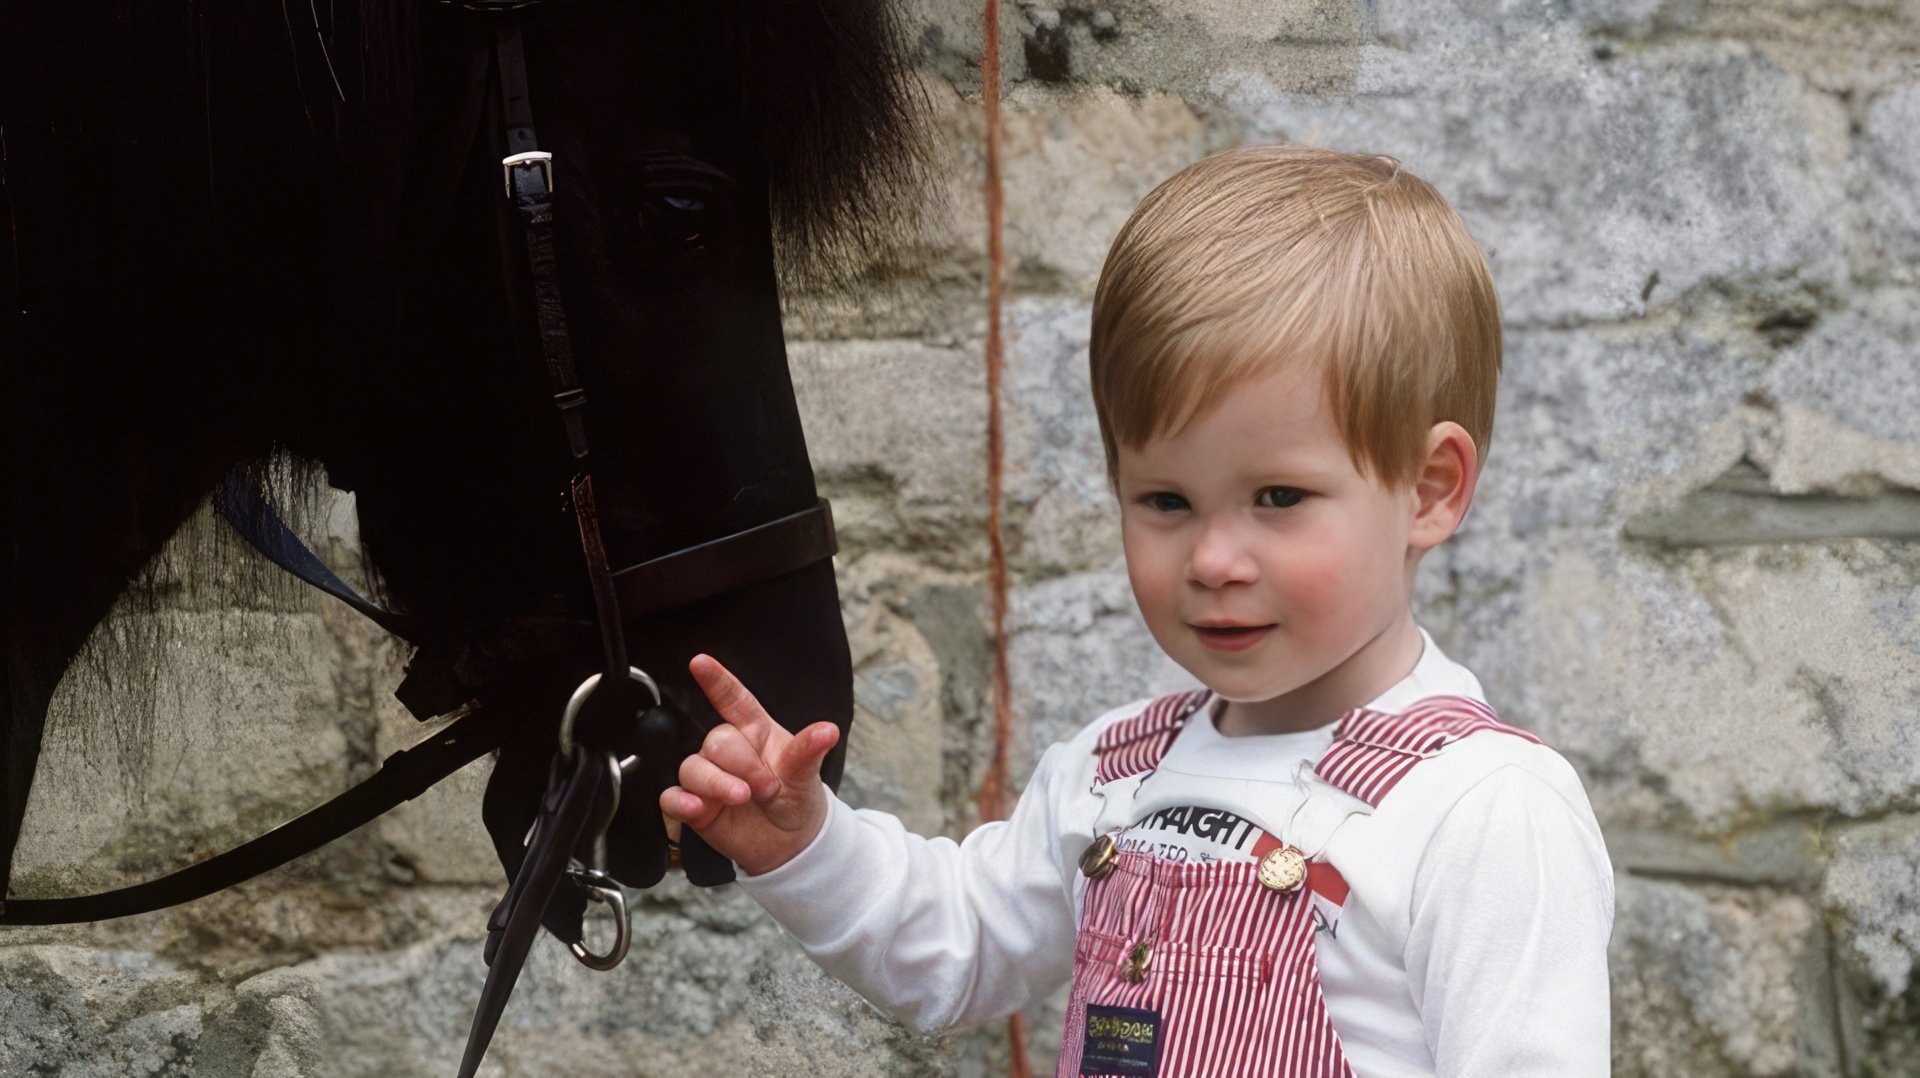 A childhood picture of Prince Harry